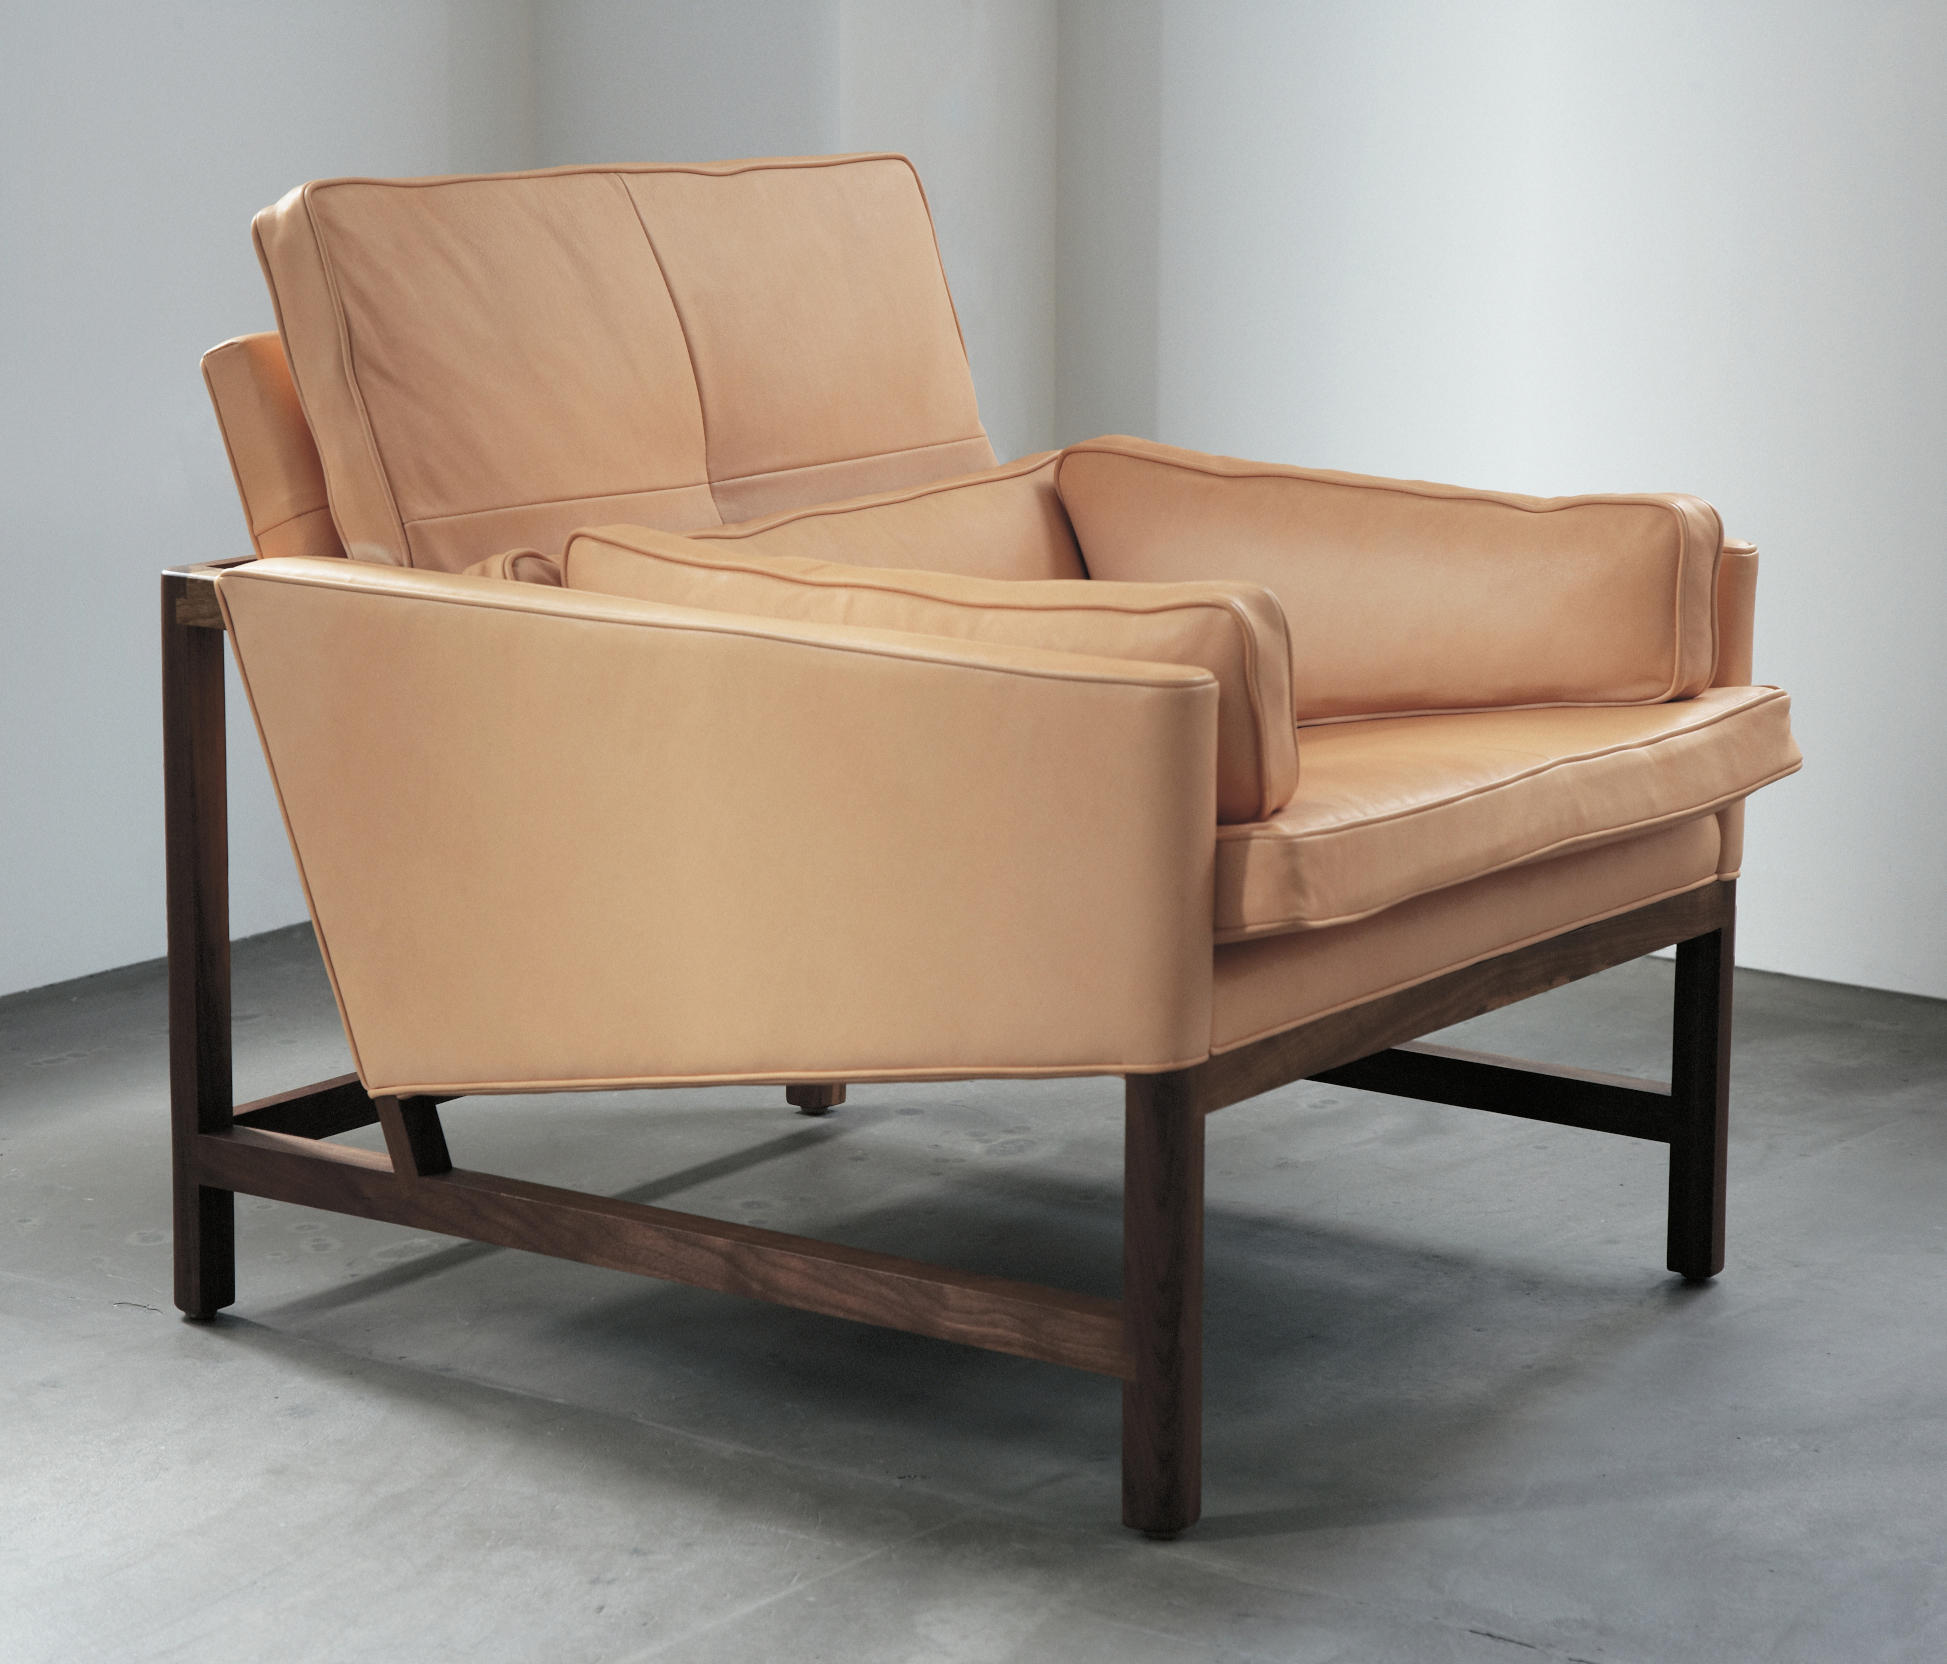 Low Back Lounge Chair & designer furniture | Architonic